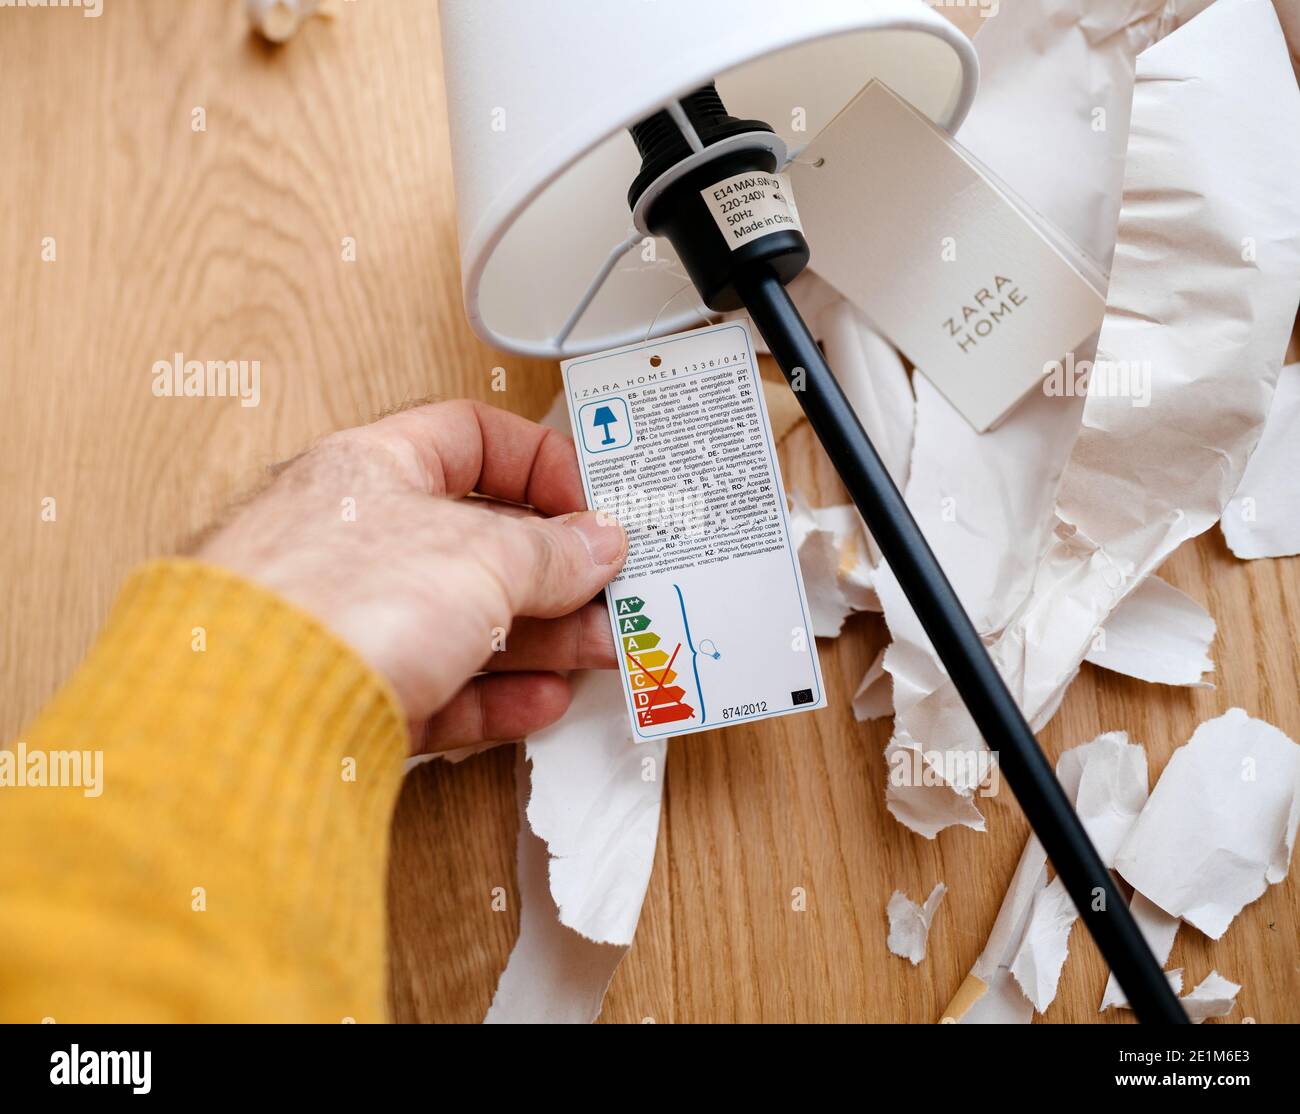 Paris, France - Dec 13, 2020: POV male hand holding paper tag of a Zara Home  table elegant lamp with ecological energy efficiency bulb recommendations  Stock Photo - Alamy